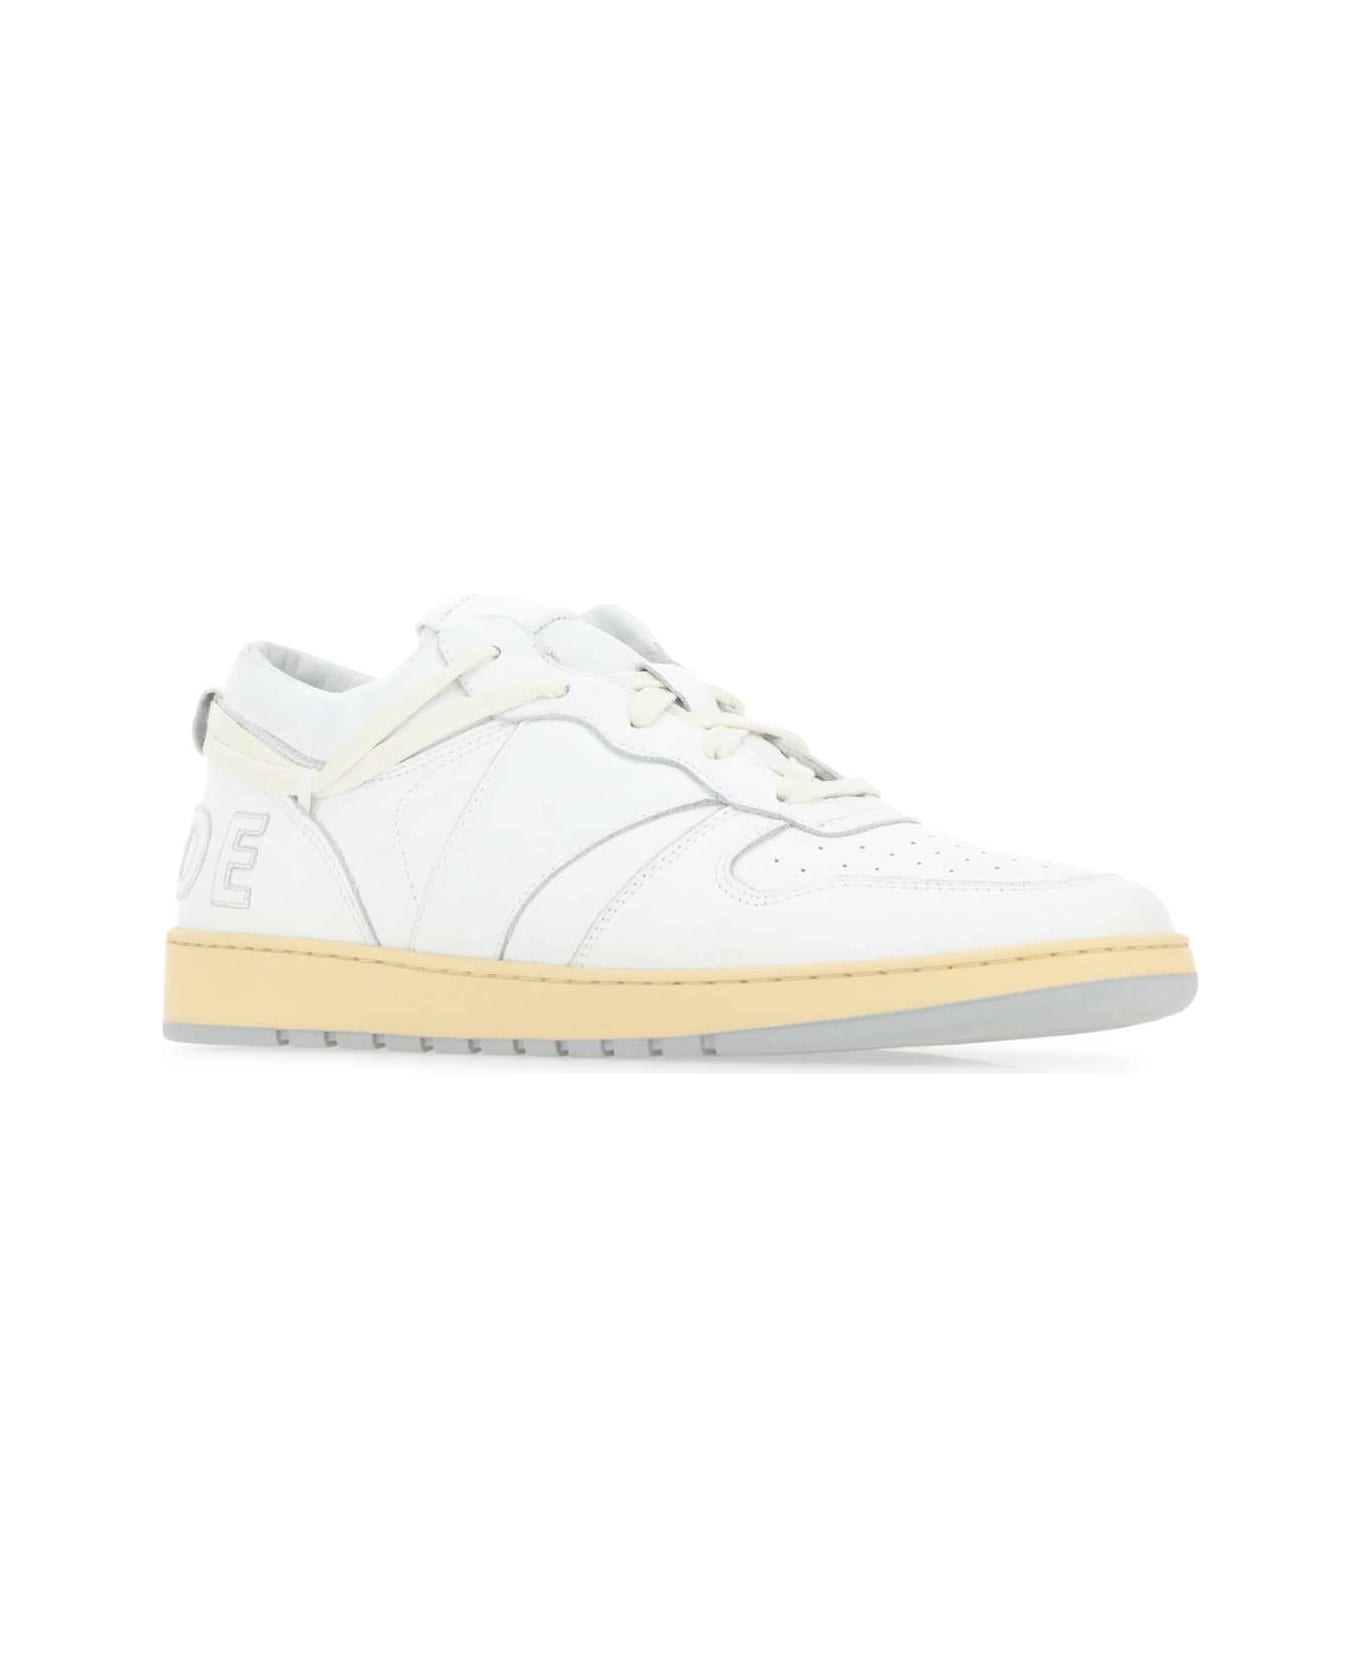 Rhude White Leather Rhecess Sneakers - 0444 スニーカー